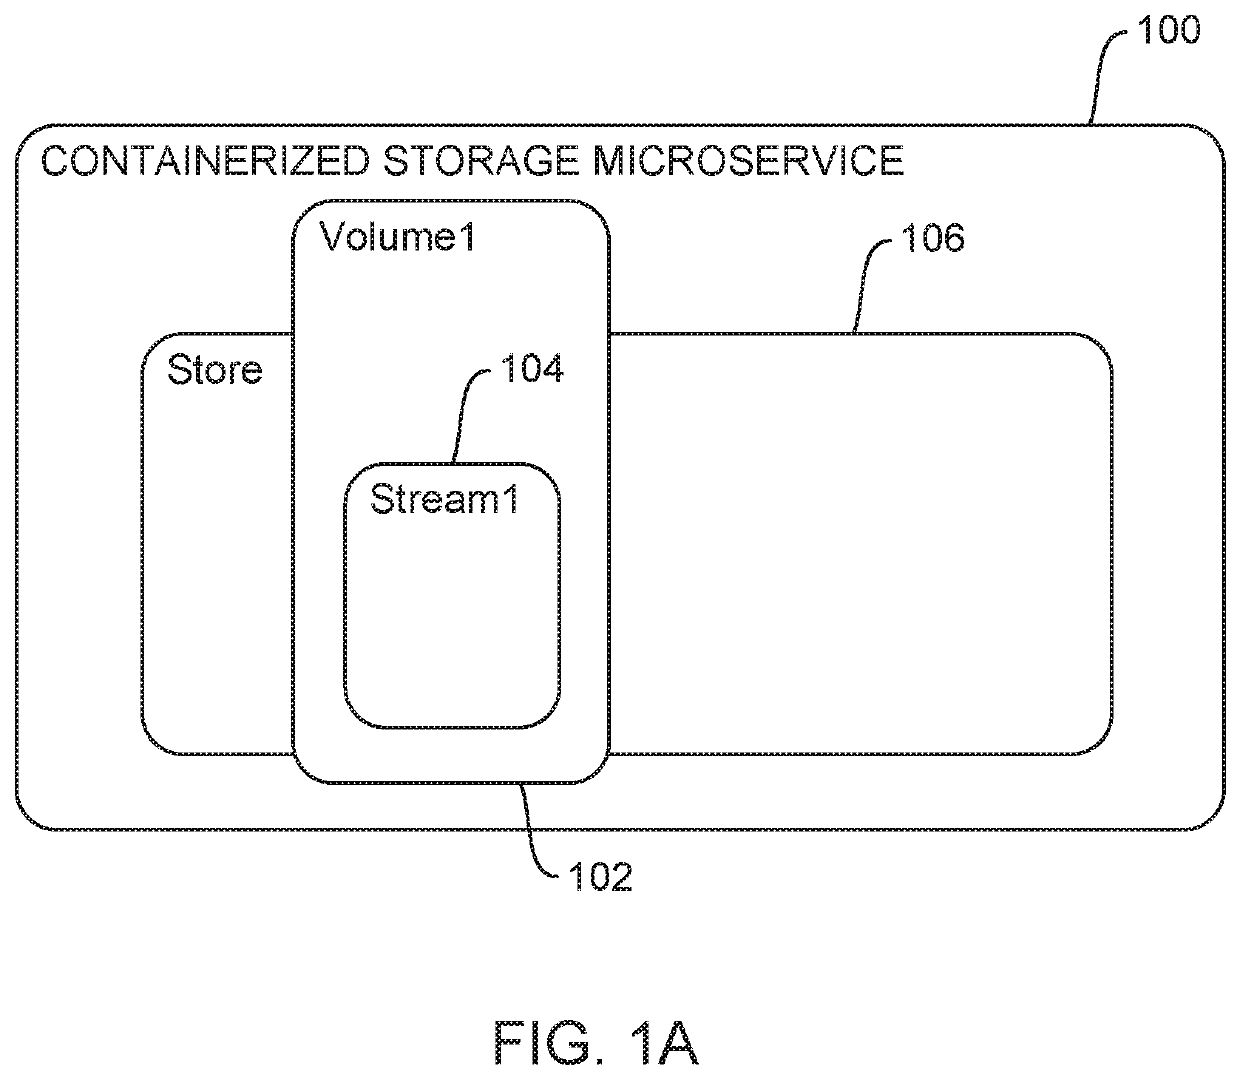 Containerized storage microservice with direct connection to requesting application container